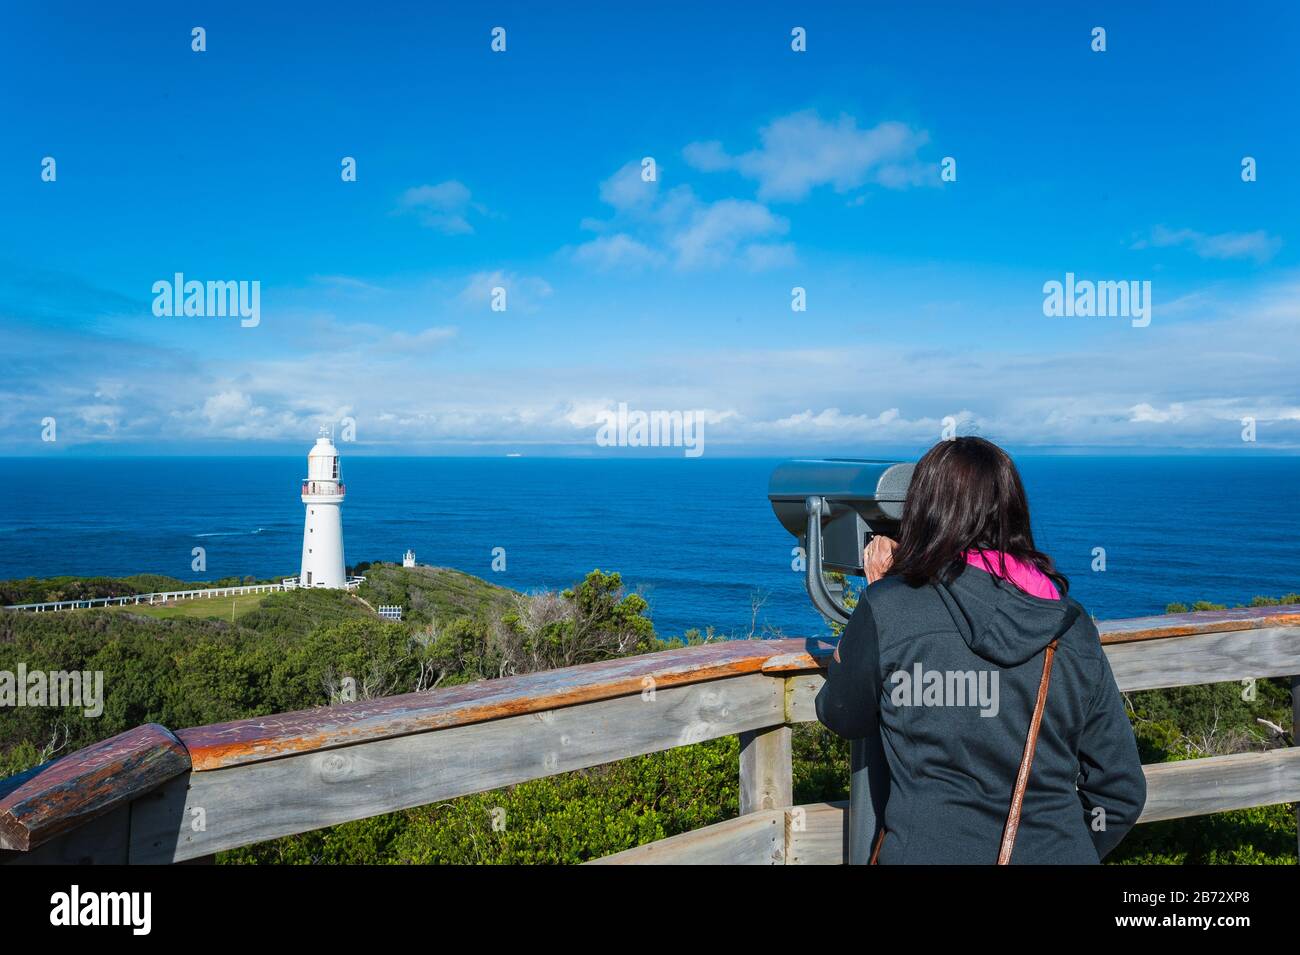 View of Cape Otway Lighthouse in Victoria, Australia as a female tourist enjoys the spectacular scene of the Southern Ocean behind the guard rails Stock Photo